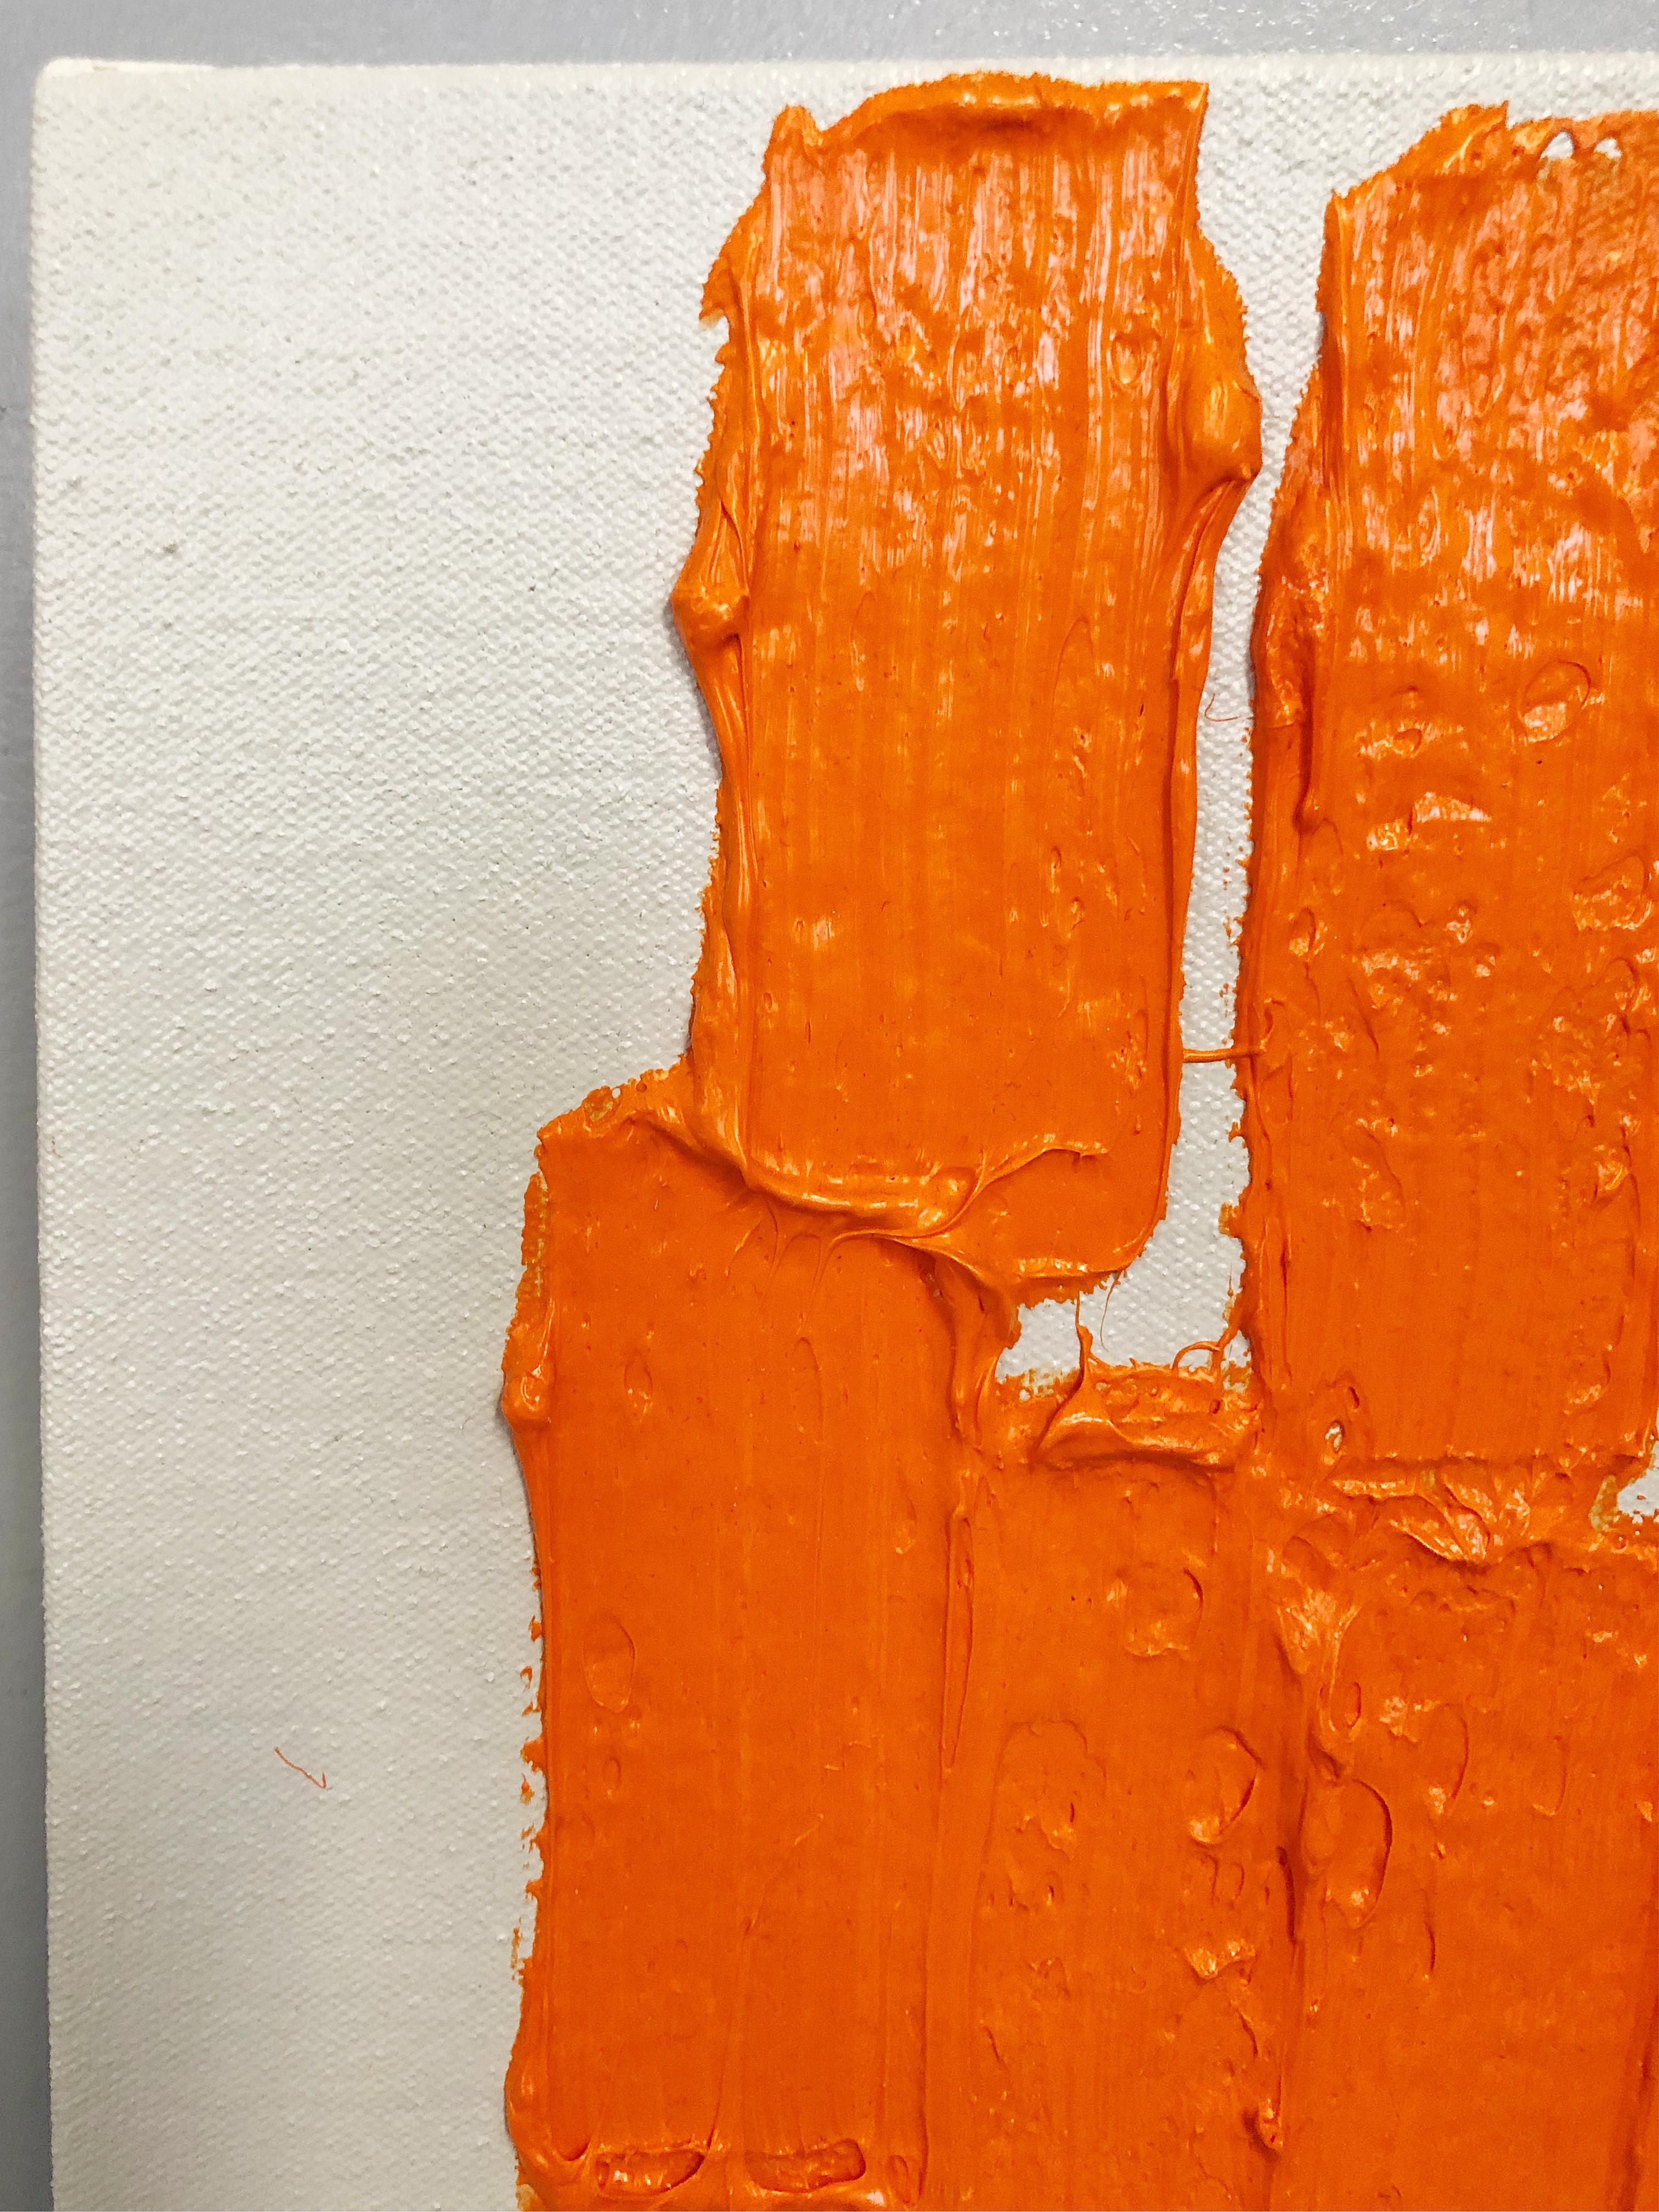 Visible Things, abstraction in Orange - Painting by John Zinsser